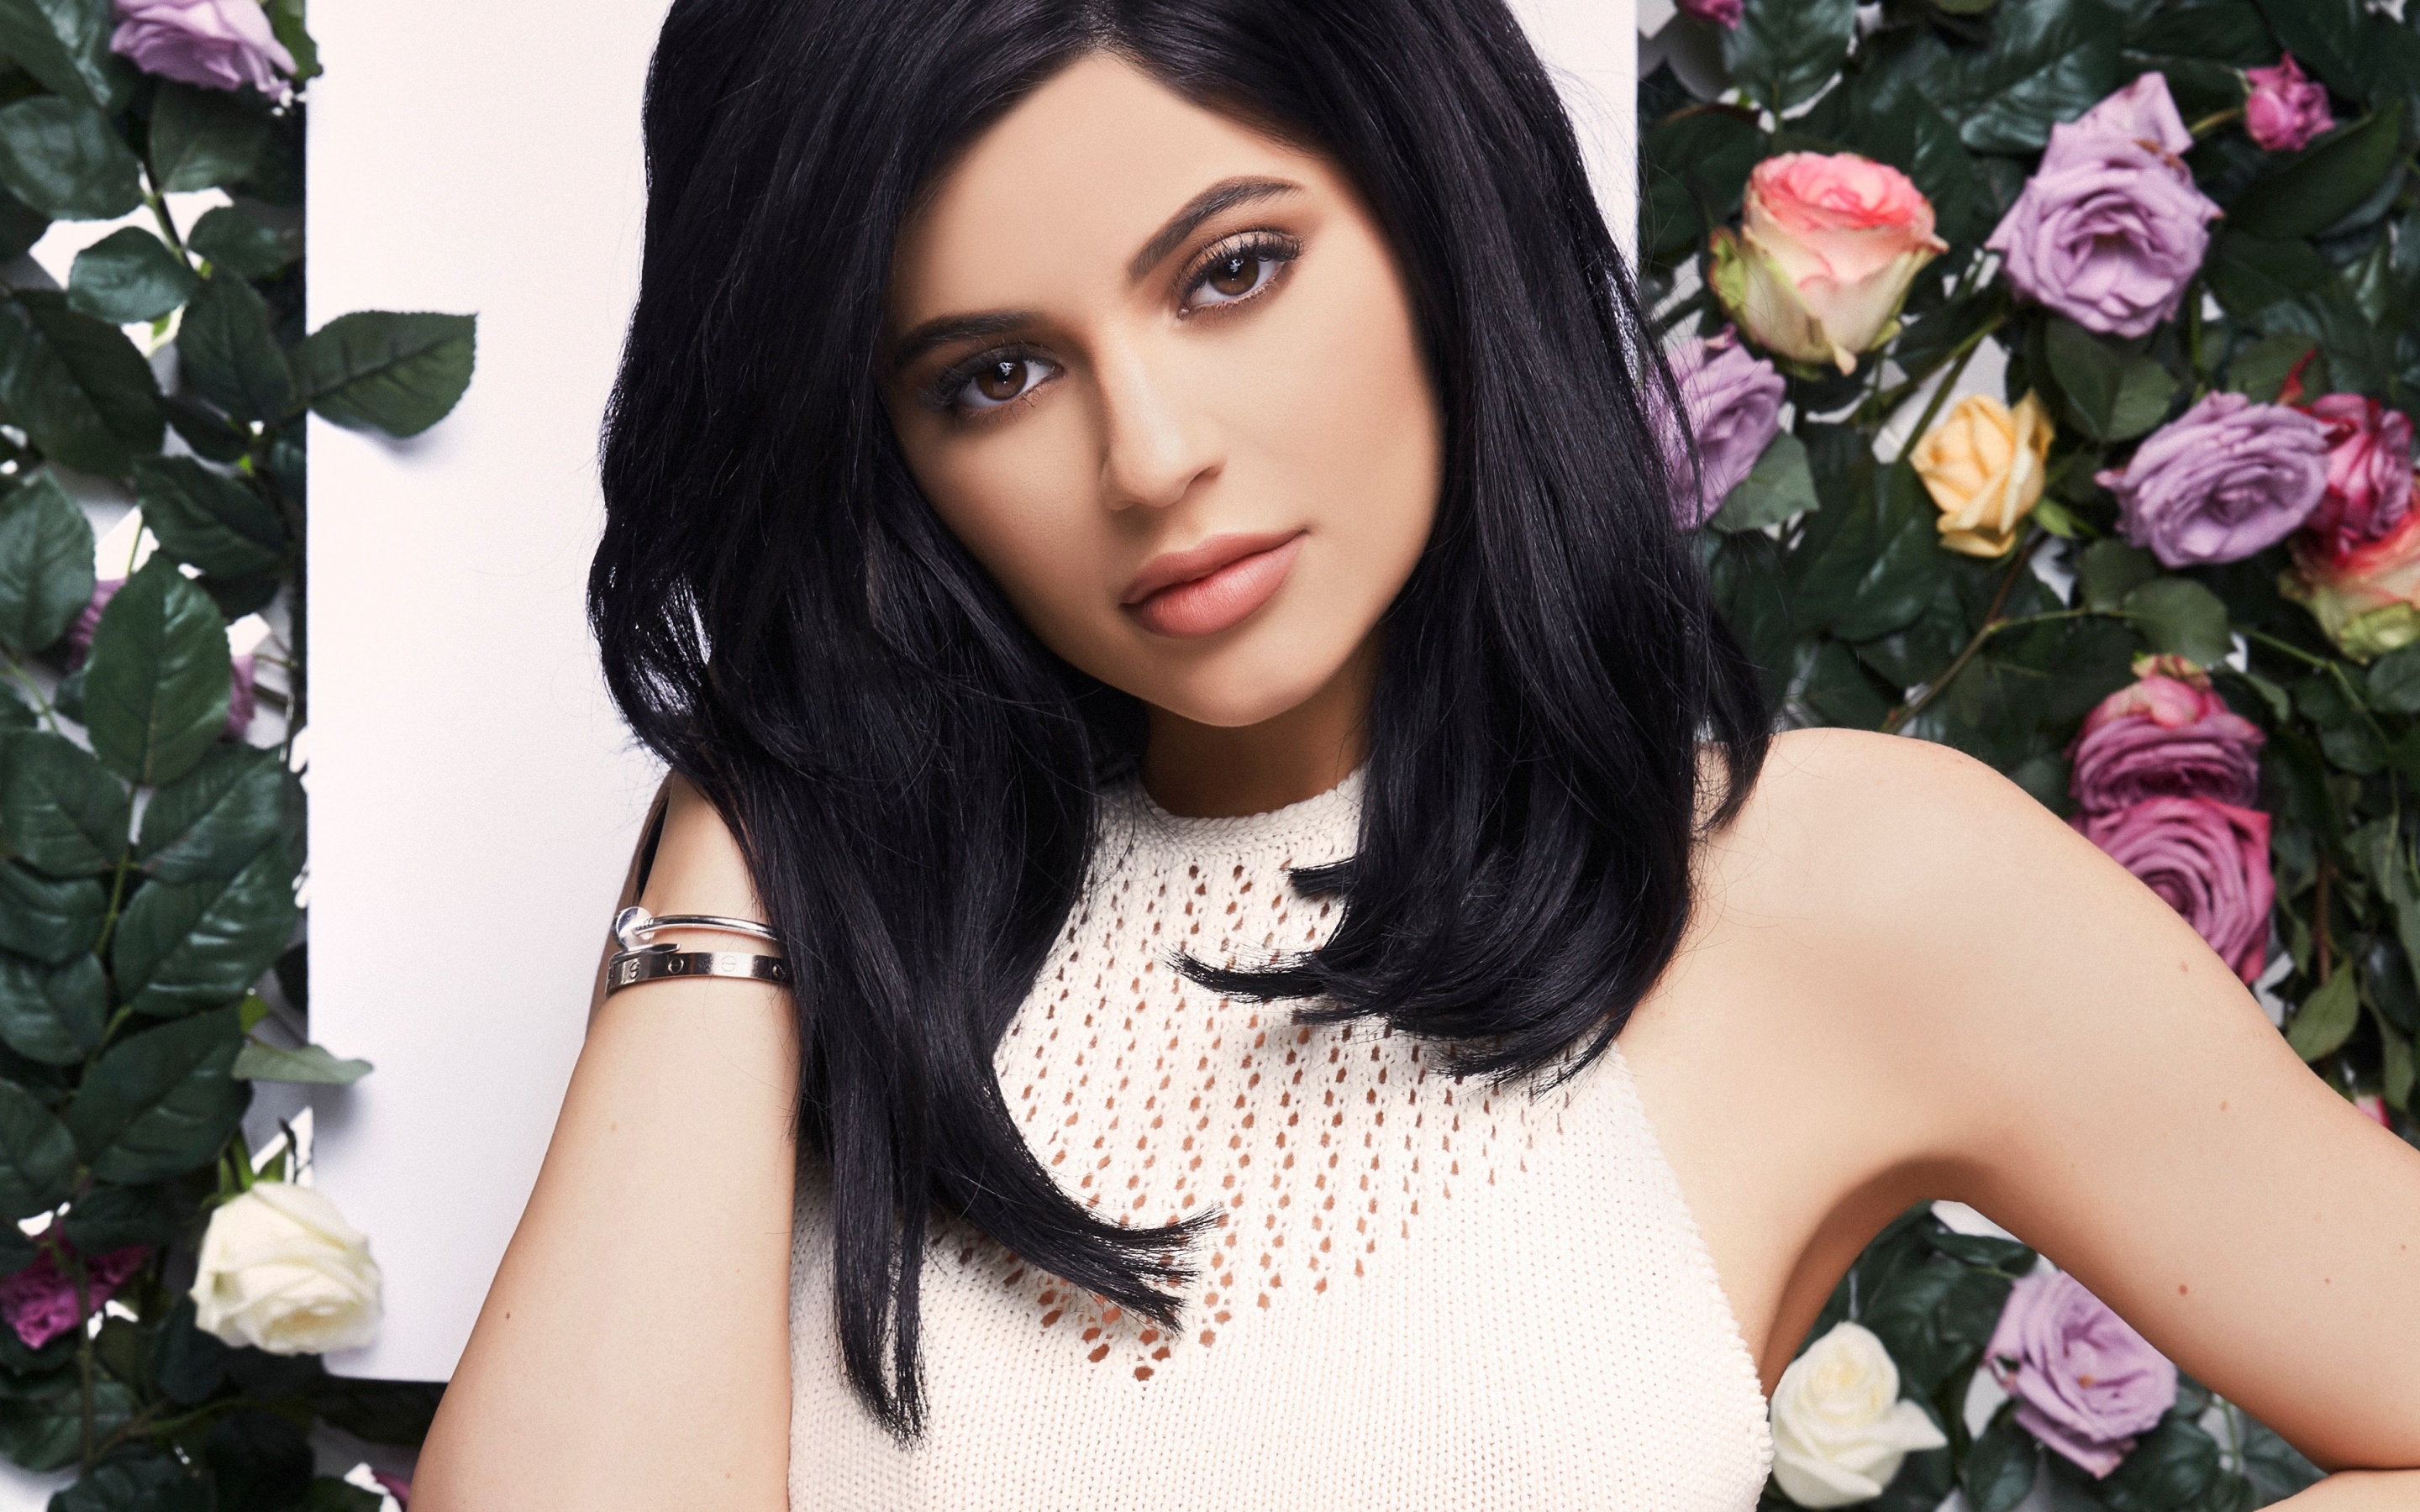 Kylie Jenner Girl Model With Sunrays On Face HD Girls Wallpapers  HD  Wallpapers  ID 86777